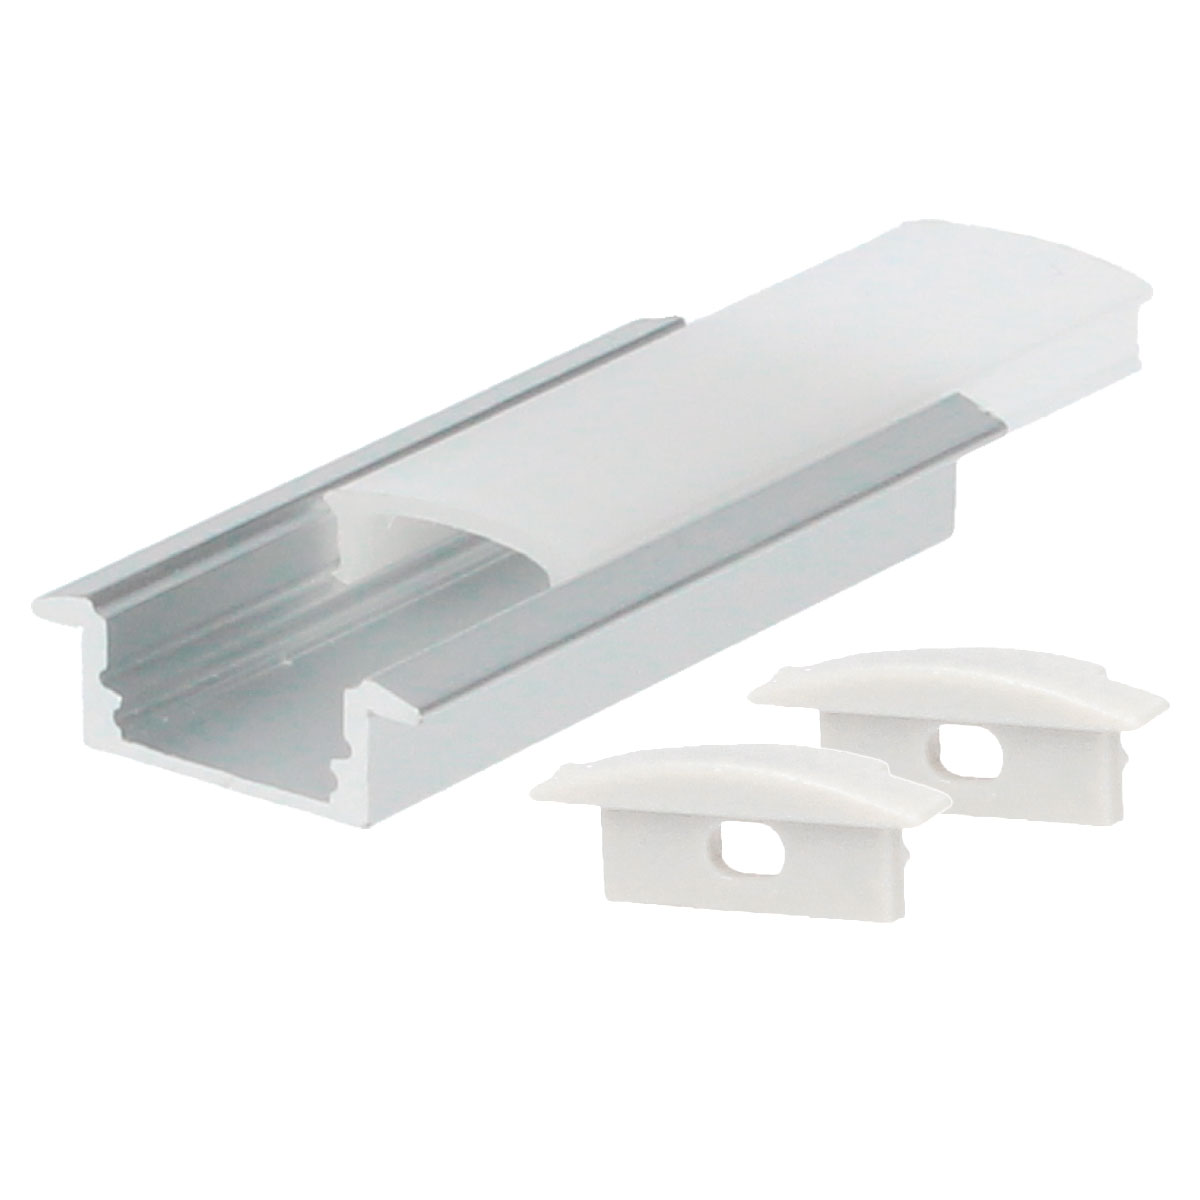 Kit 2M surface aluminum profile for LED strips up to 12mm